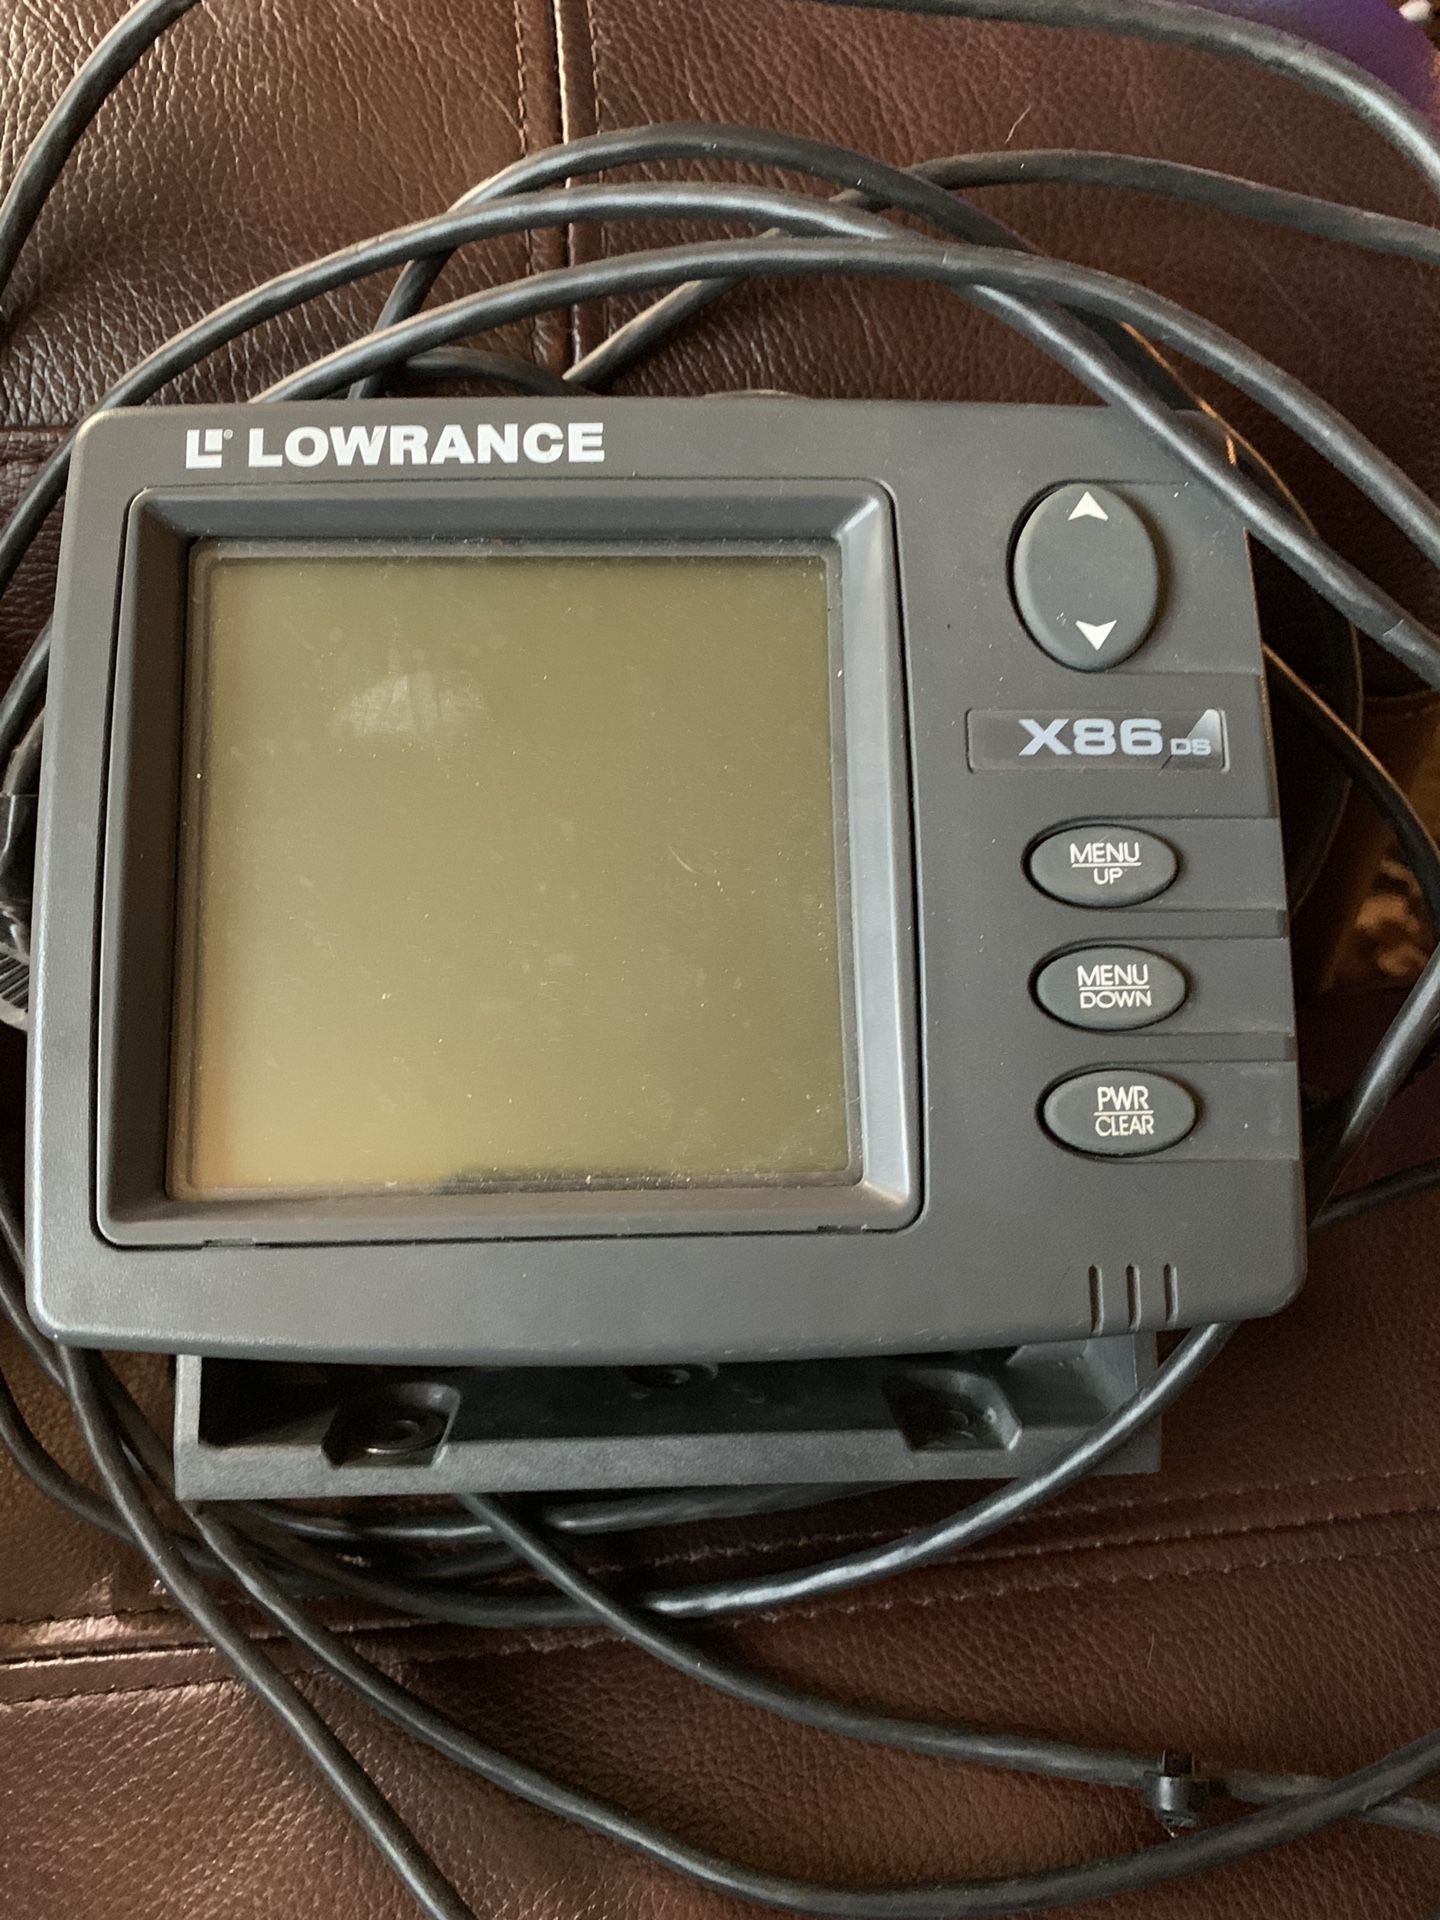 Lowrance fish finder X86 Ds